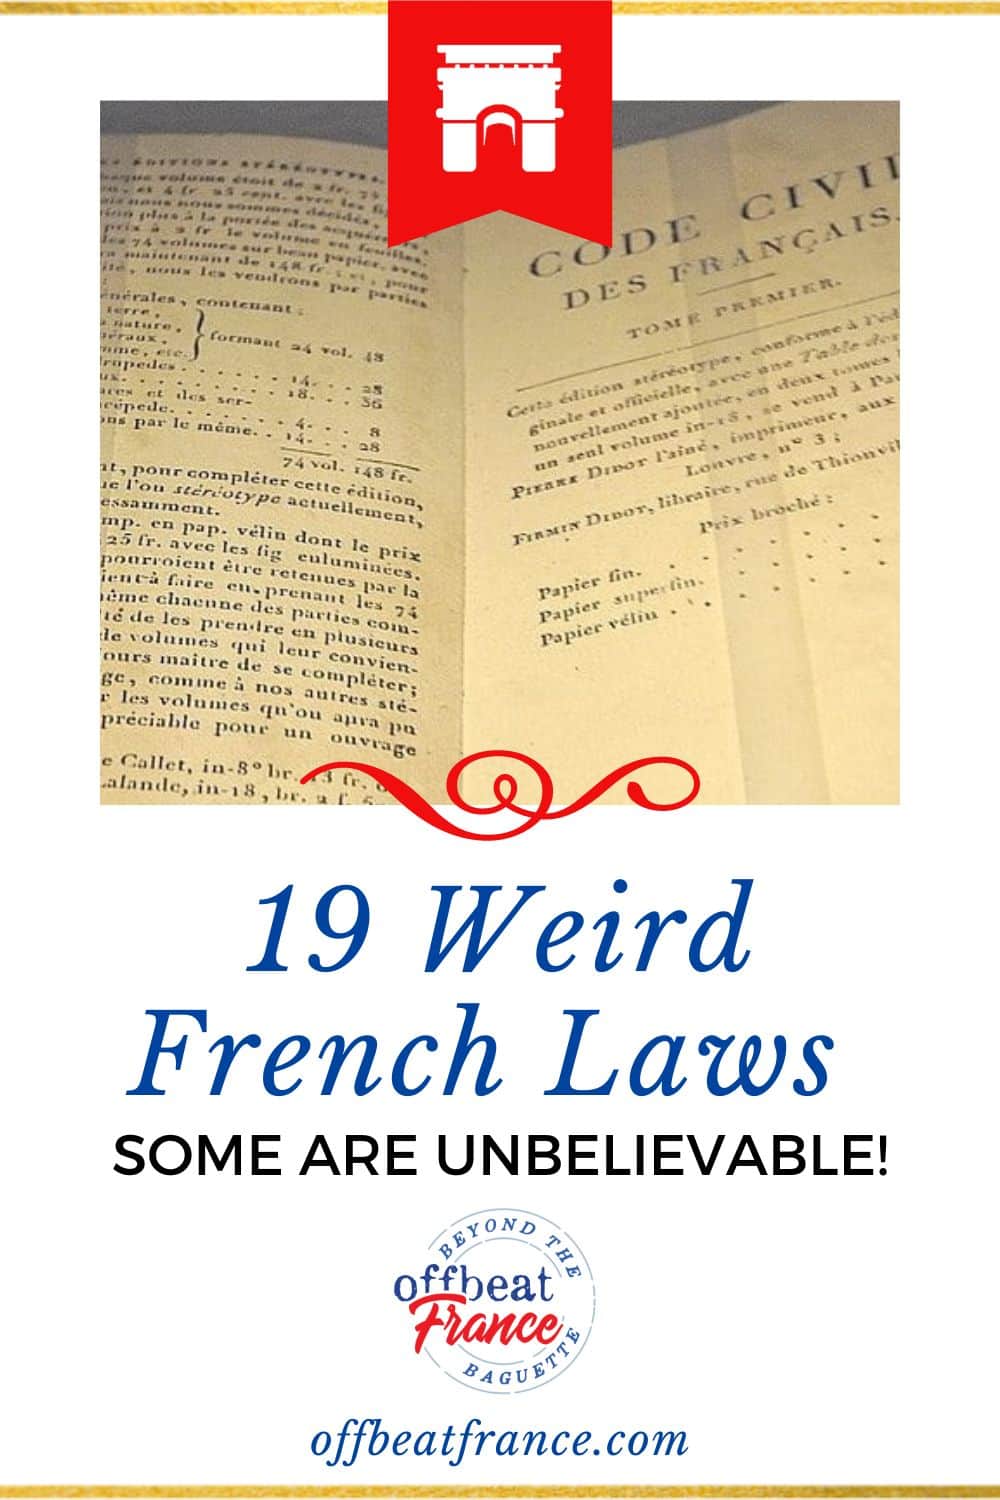 Weird French laws pin